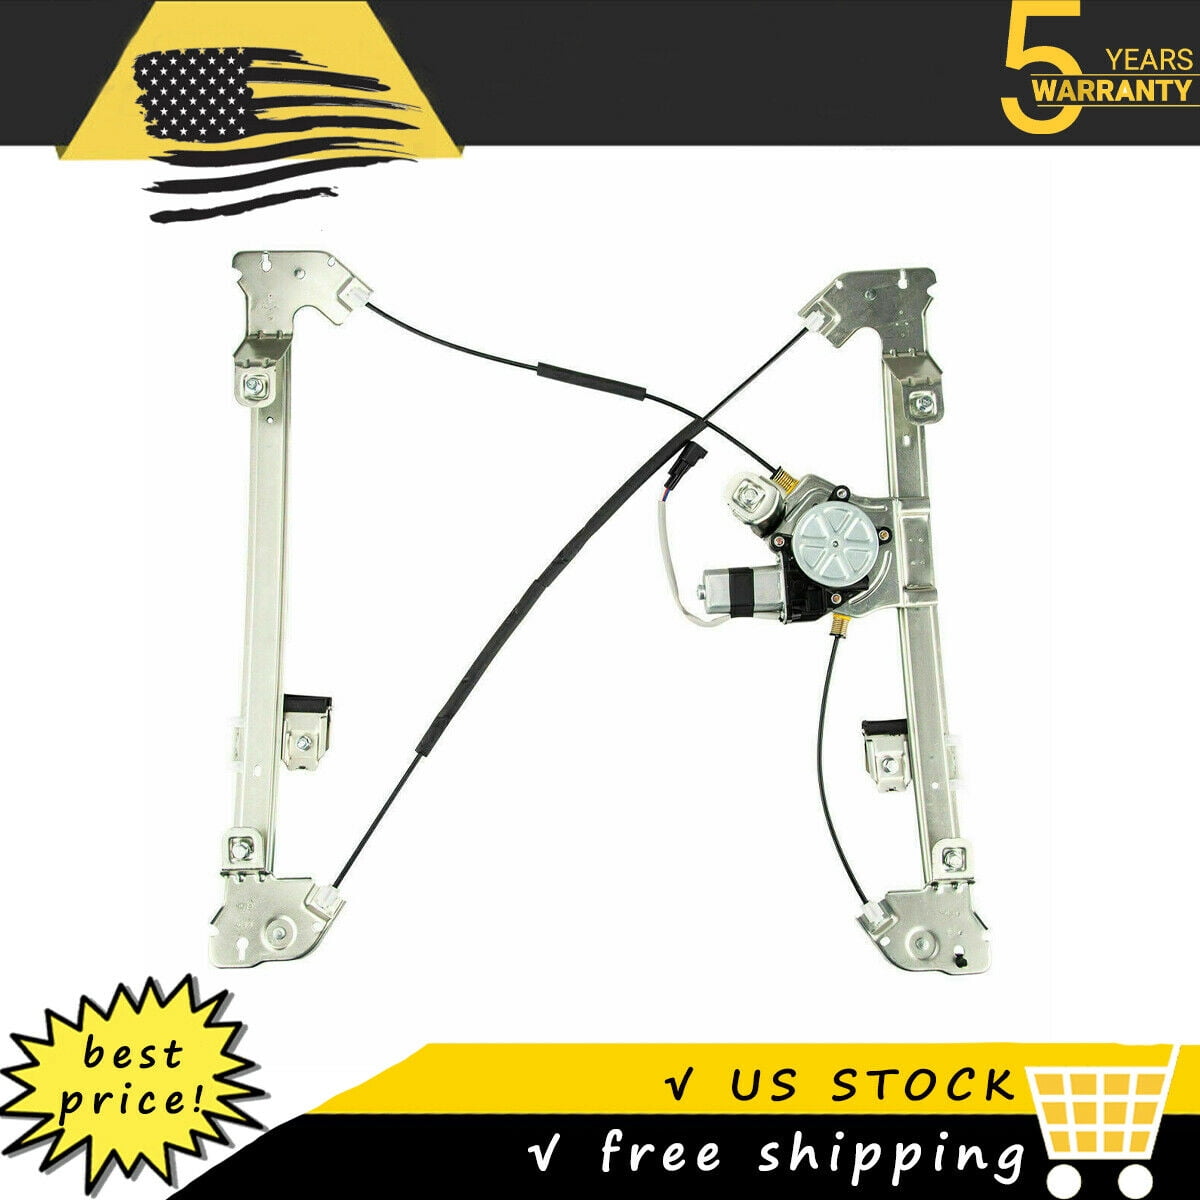 AutoShack WR841970 Rear Driver Side Power Window Regulator with Motor Replacement for 2004 2005 2006 2007 2008 Ford F-150 2006-2008 Lincoln Mark LT 4.2L 4.6L 5.4L V6 V8 4WD AWD RWD 